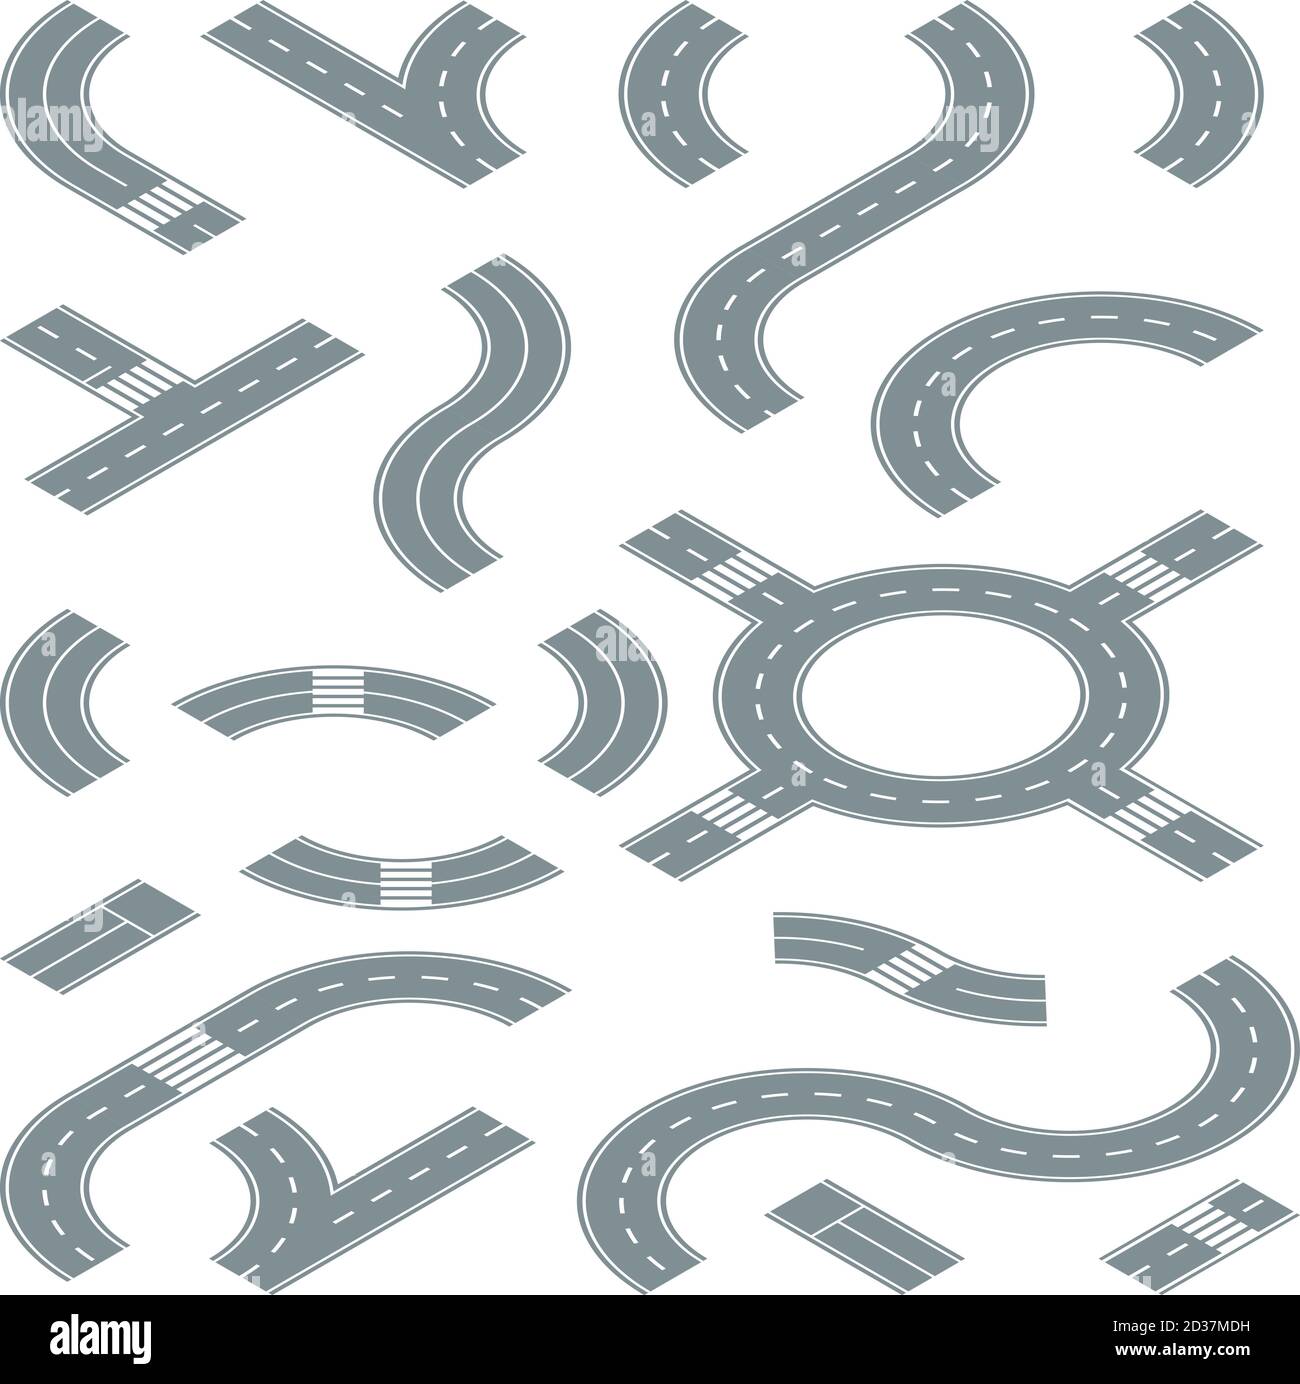 Isometric road. Street elements for city traffic map pedestrian crossing road markings junction circular motion vector Stock Vector